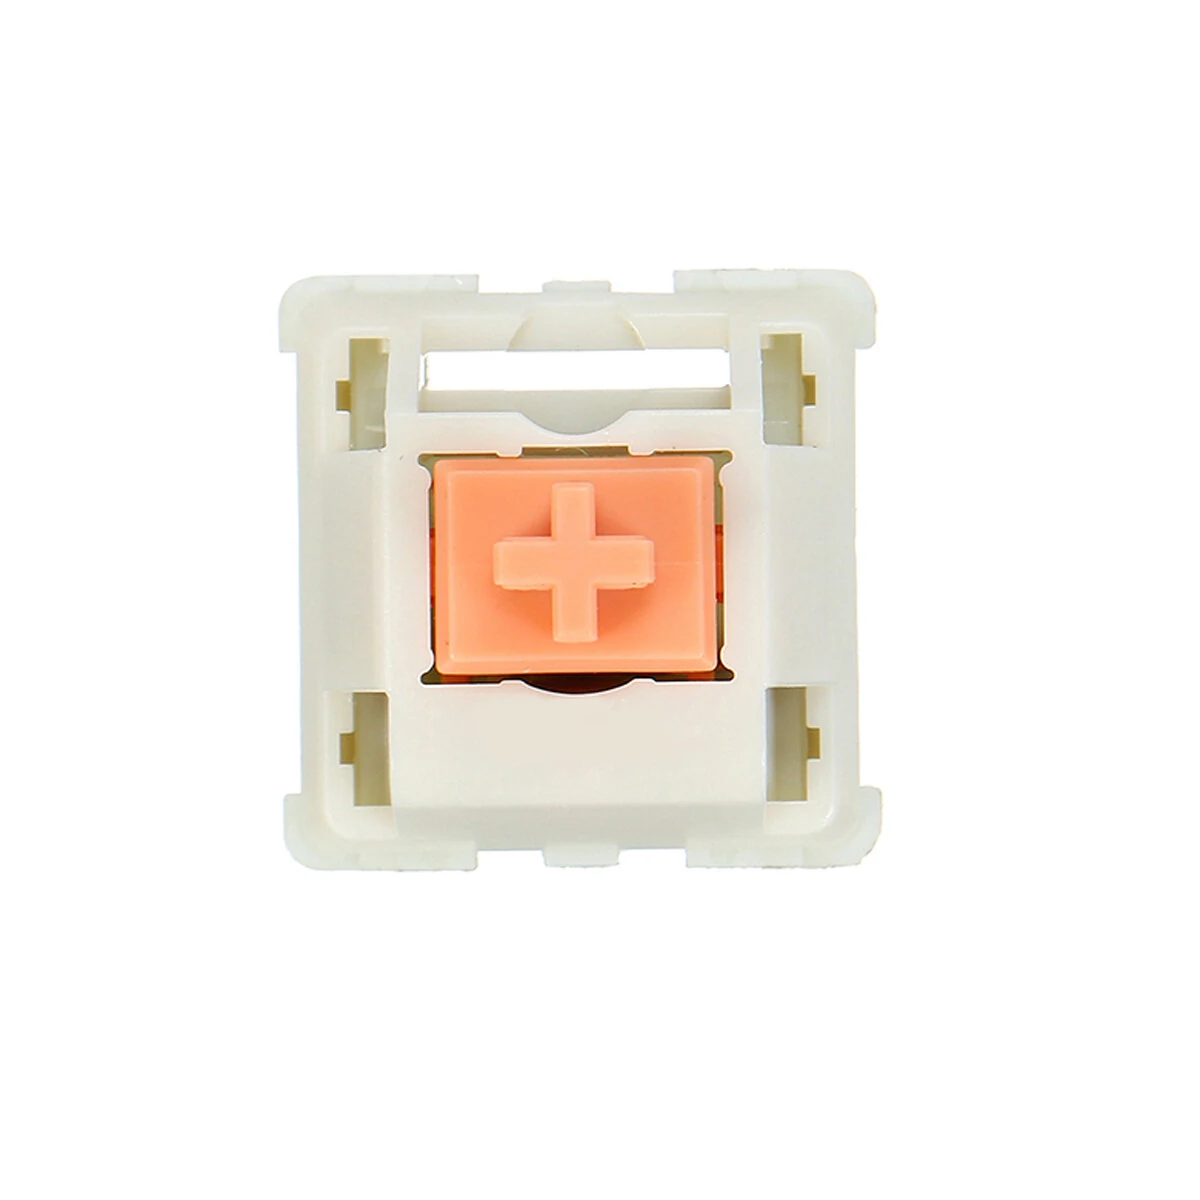 Feker 35/70/90Pcs Mechanical Switches 3 Pin Tactile Pink Jade Switch for Mechanical Gaming Keyboard - 90pcs